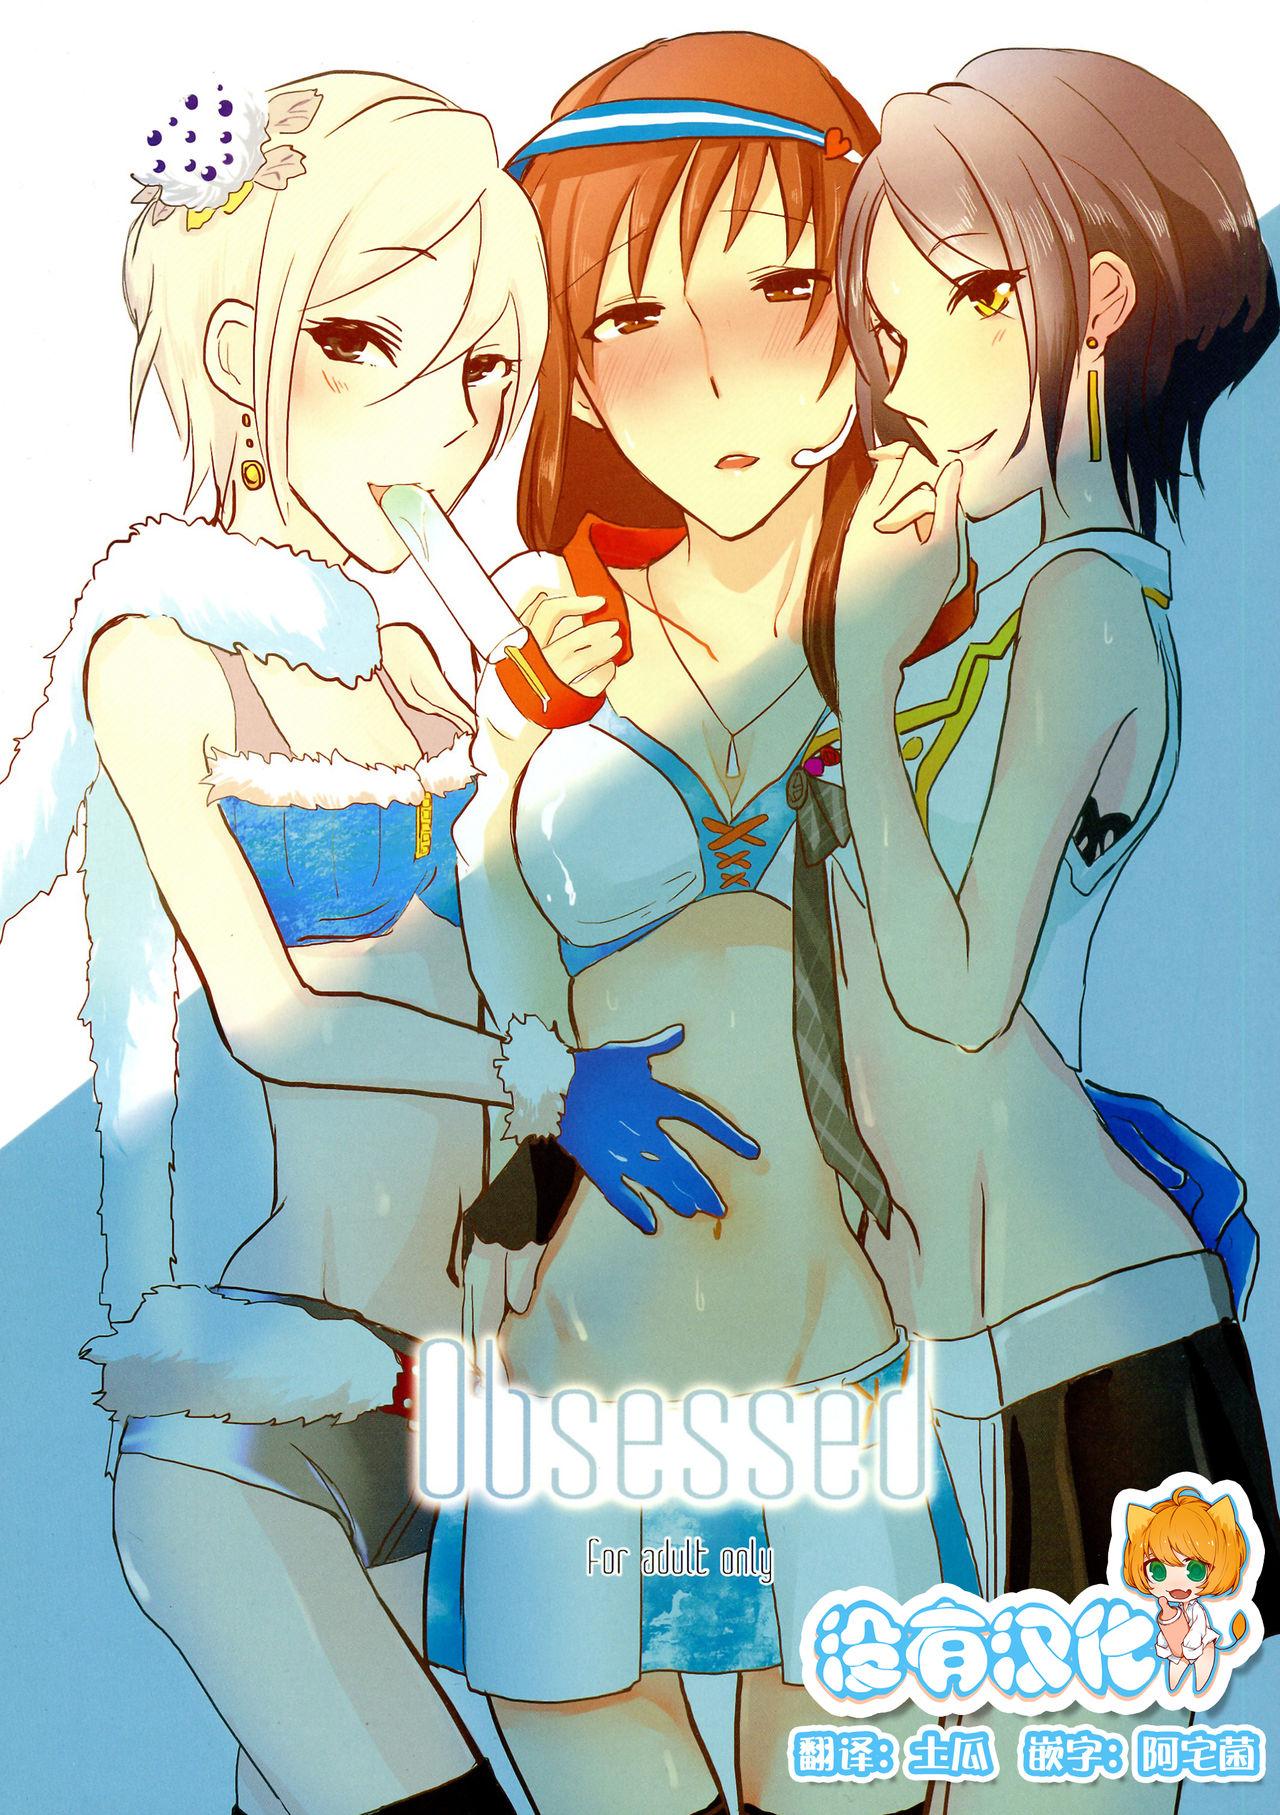 Pasivo obsessed - The idolmaster Hard - Picture 1